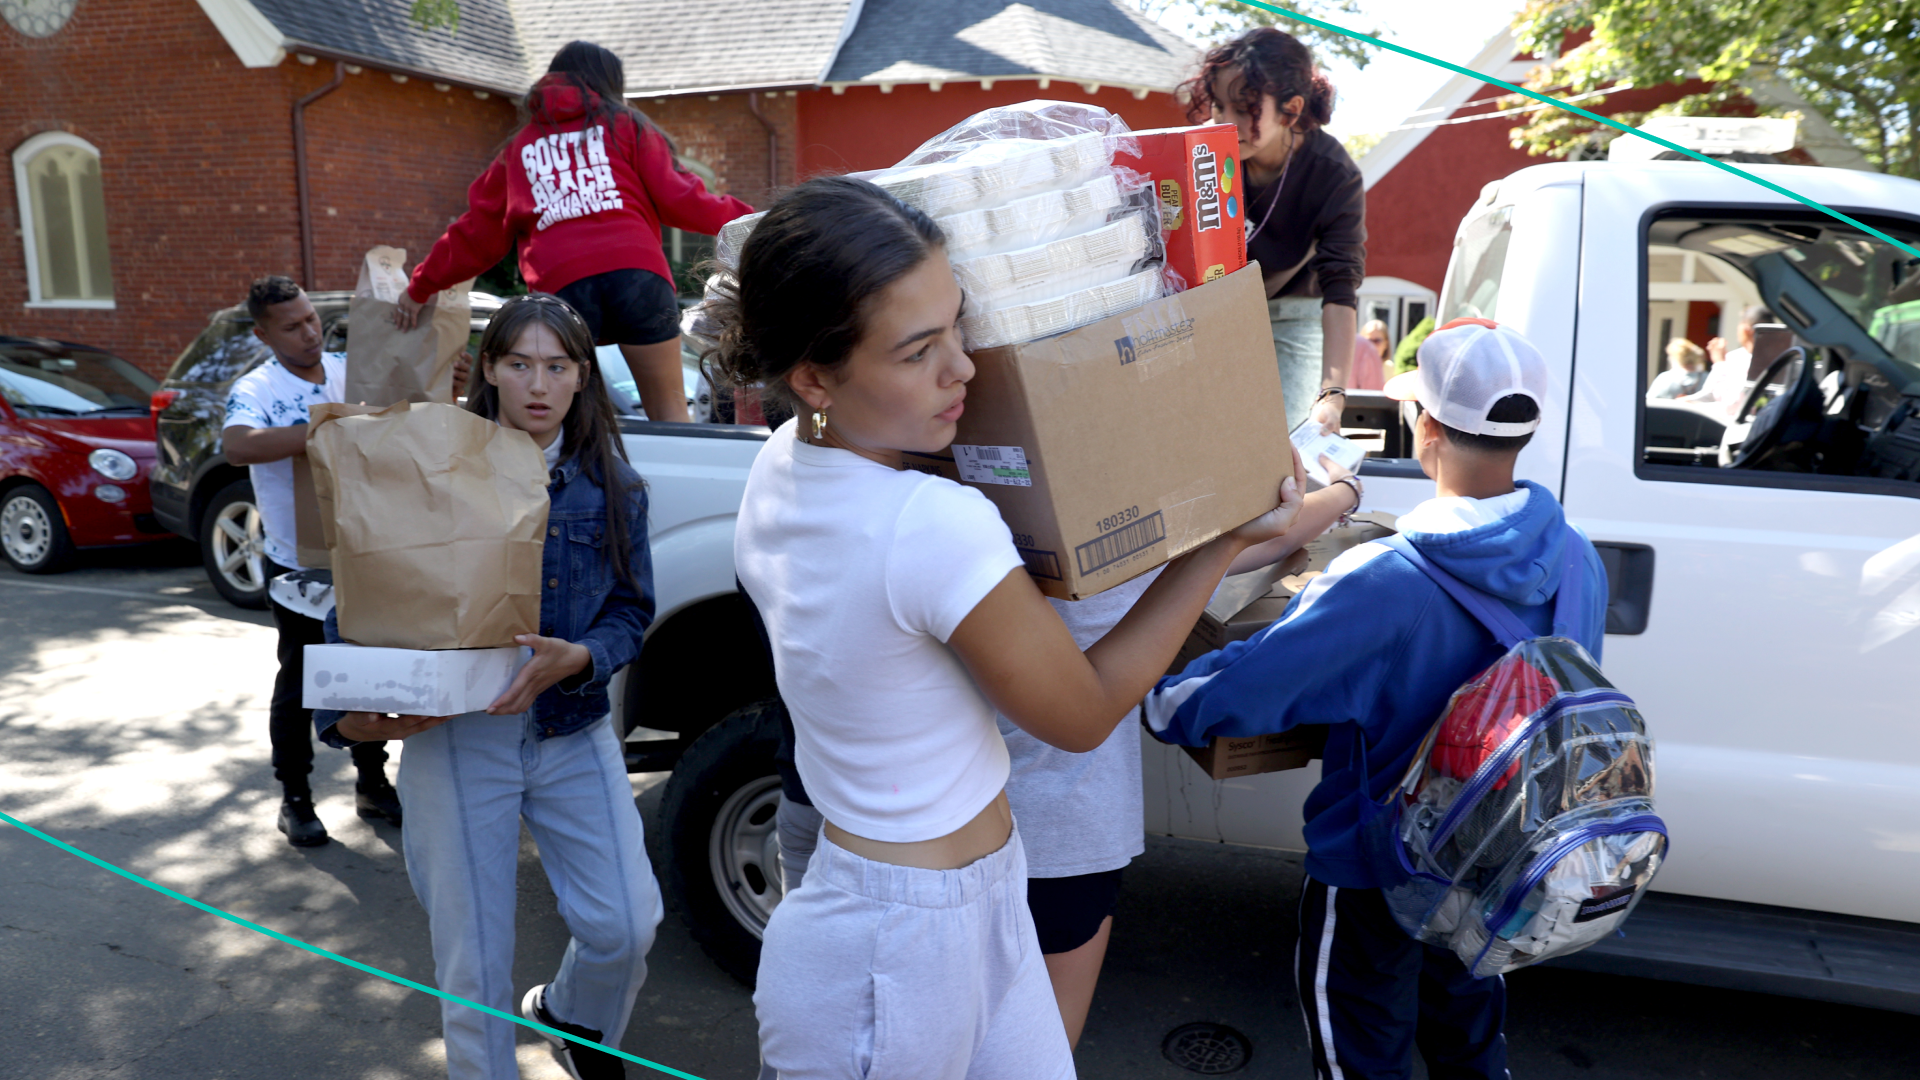 People unload supplies from a truck